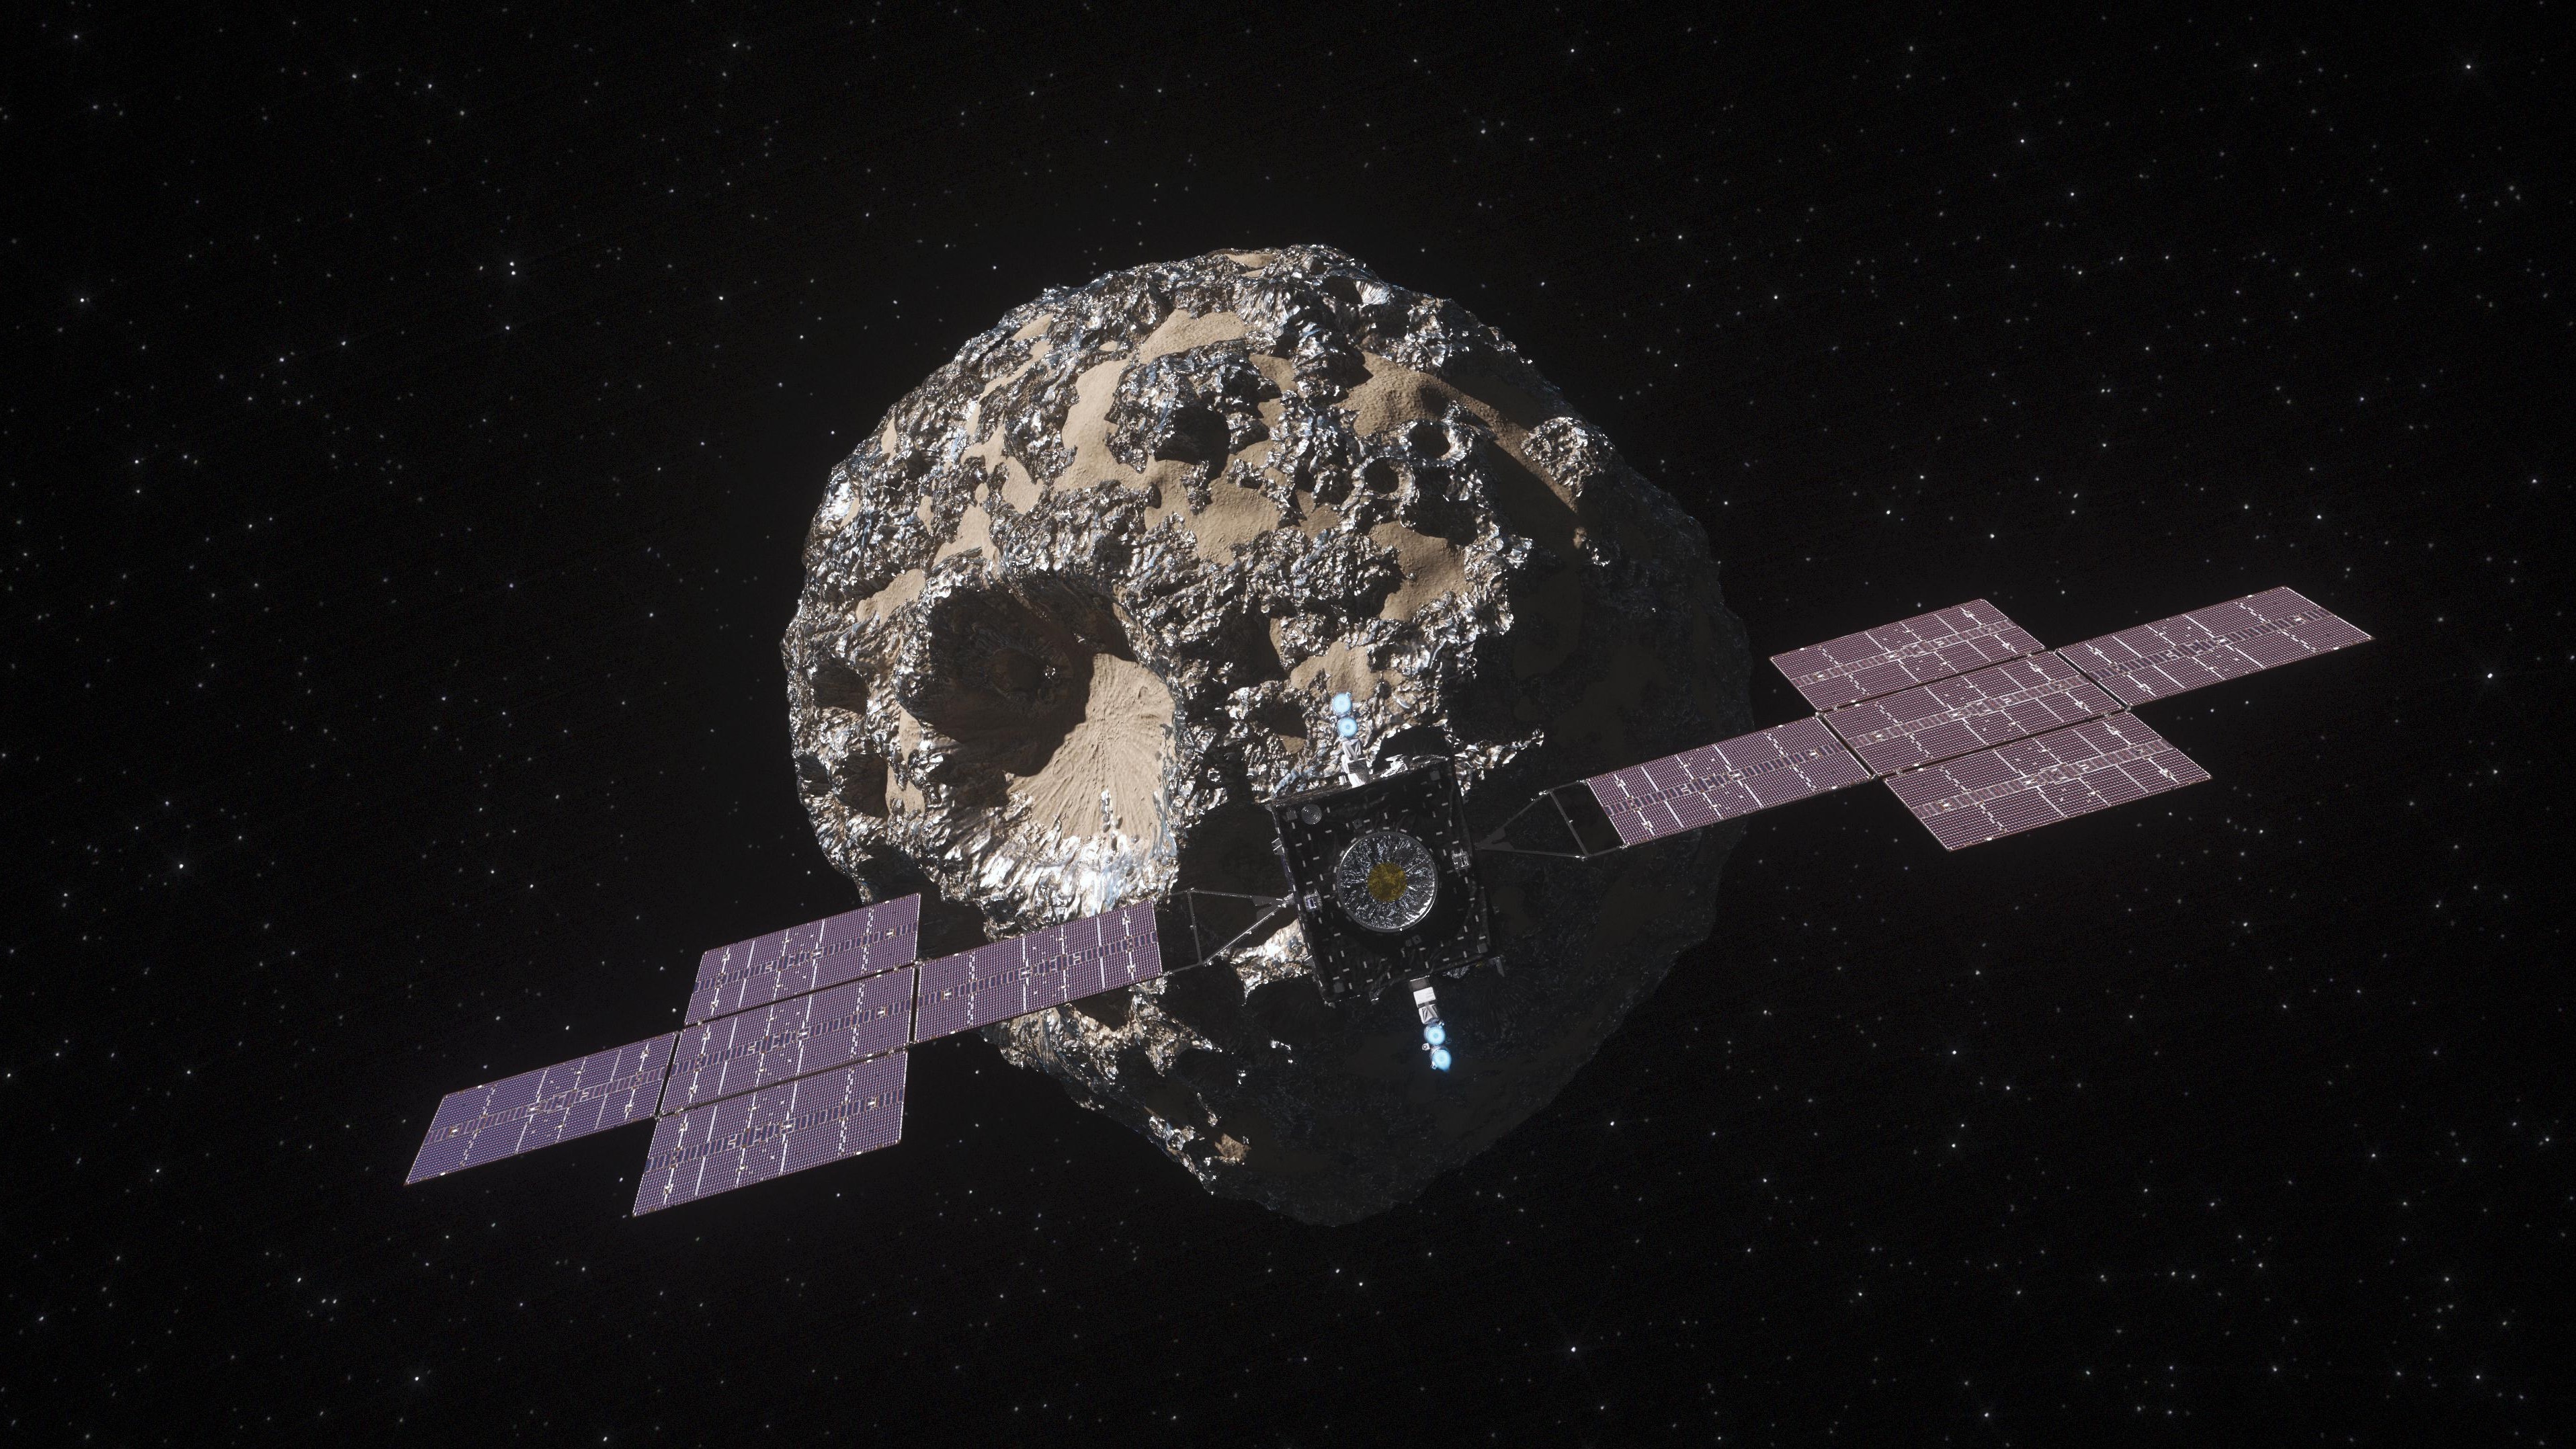 The Psyche mission: A visit to a metal asteroid | Space